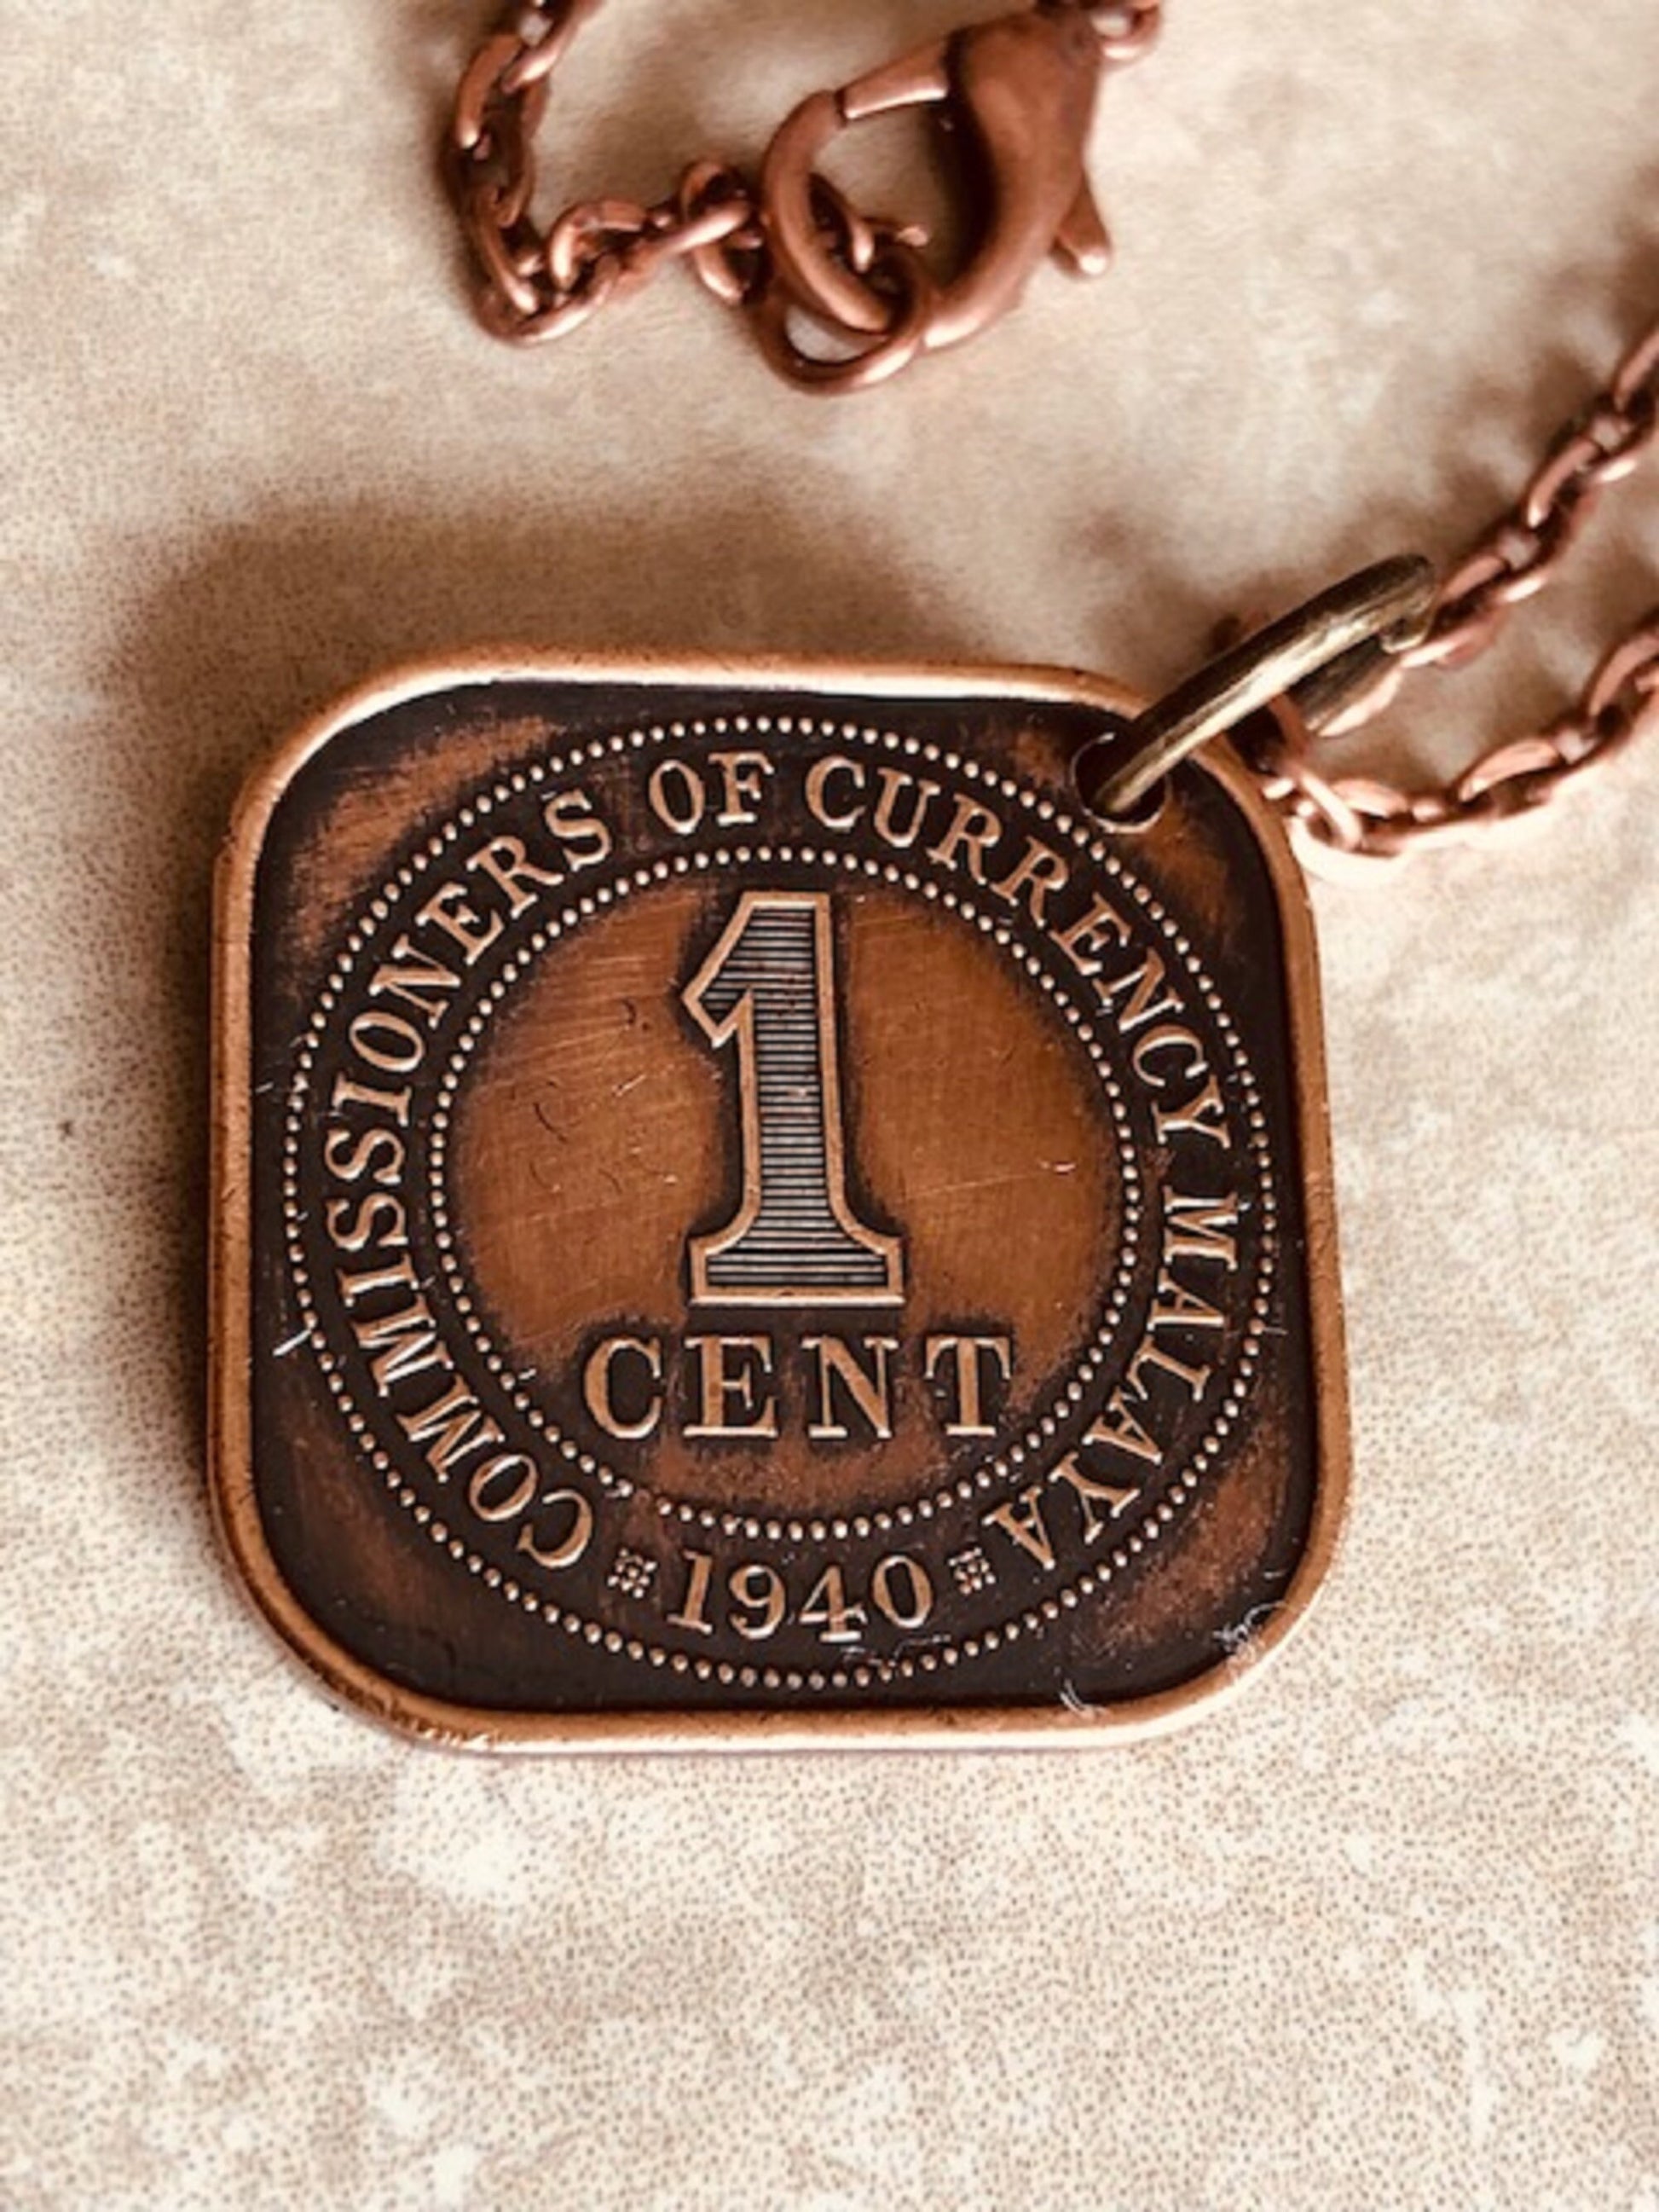 Malaya Coin Necklace 1 Cent Straits Settlements Personal Old Vintage Handmade Jewelry Gift Friend Charm For Him Her World Coin Collector